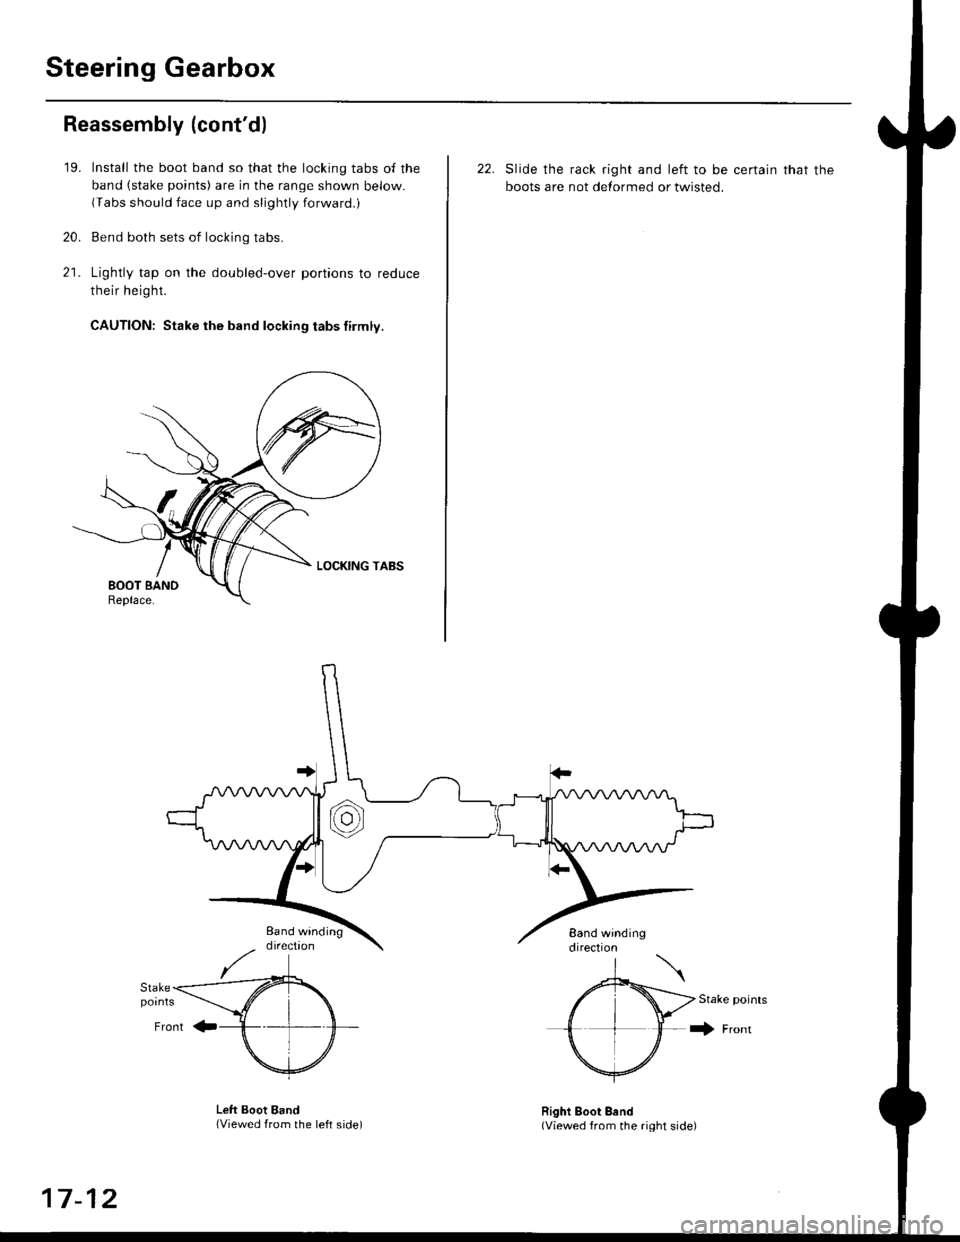 HONDA CIVIC 1996 6.G User Guide Steering Gearbox
Reassembly (contd)
21.
19.
20.
Install the boot band so that the locking tabs of the
band (stake points) are in the range shown below.
{Tabs should face up and slightly forwaro.,
Be